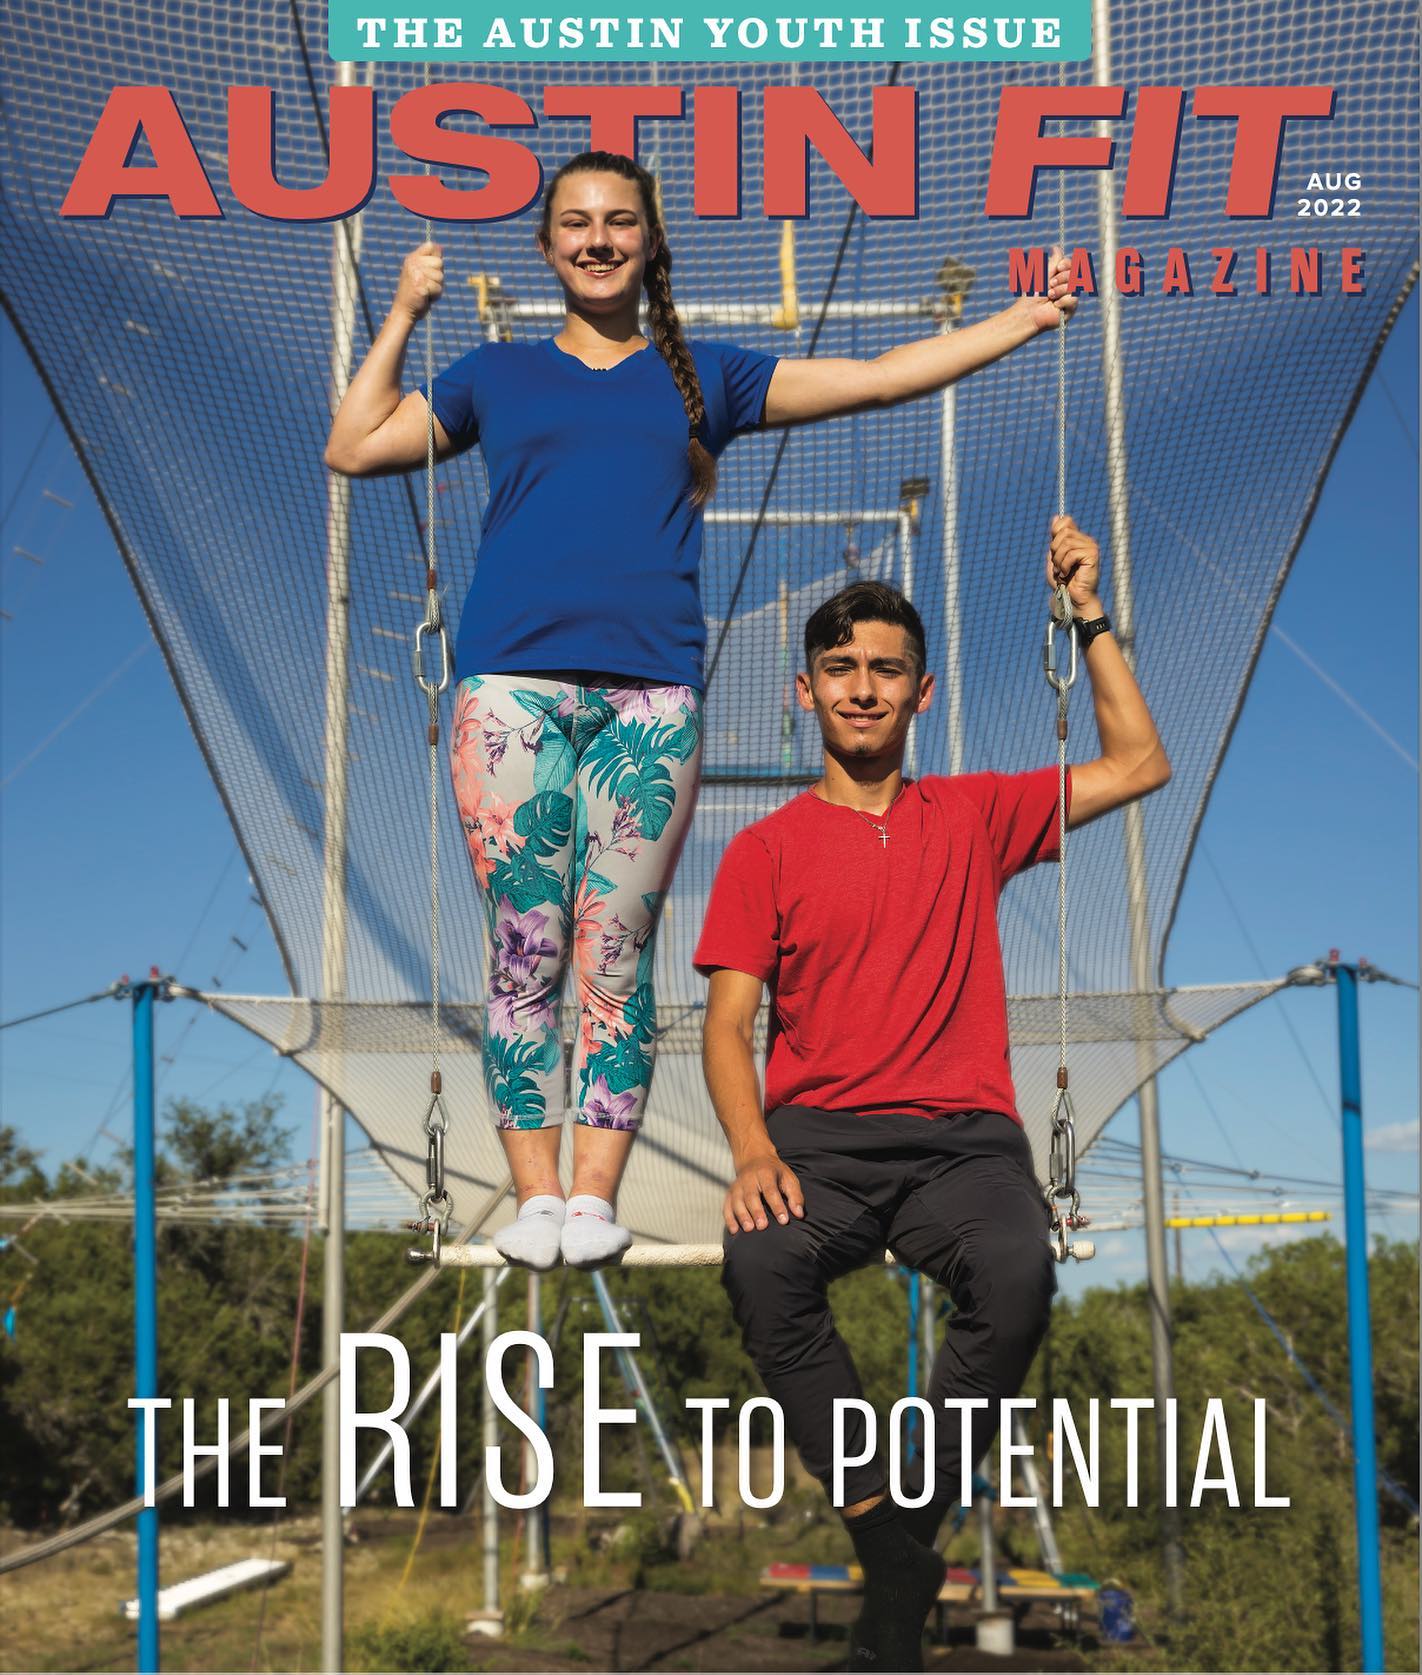 It’s time!🚨Our Austin Youth Issue is here! In this issue you’ll hear about kids overcoming their fears through circus arts, ways the community is serving kids through meal programs, yoga schools and much more. Let’s hear it for the kids, the future of Austin! 😍 Read the August Issue using the link in our bio or download our AFM app! 

#KeepAustinFit #AustinFit #AugustIssue #AustinTX #Youth